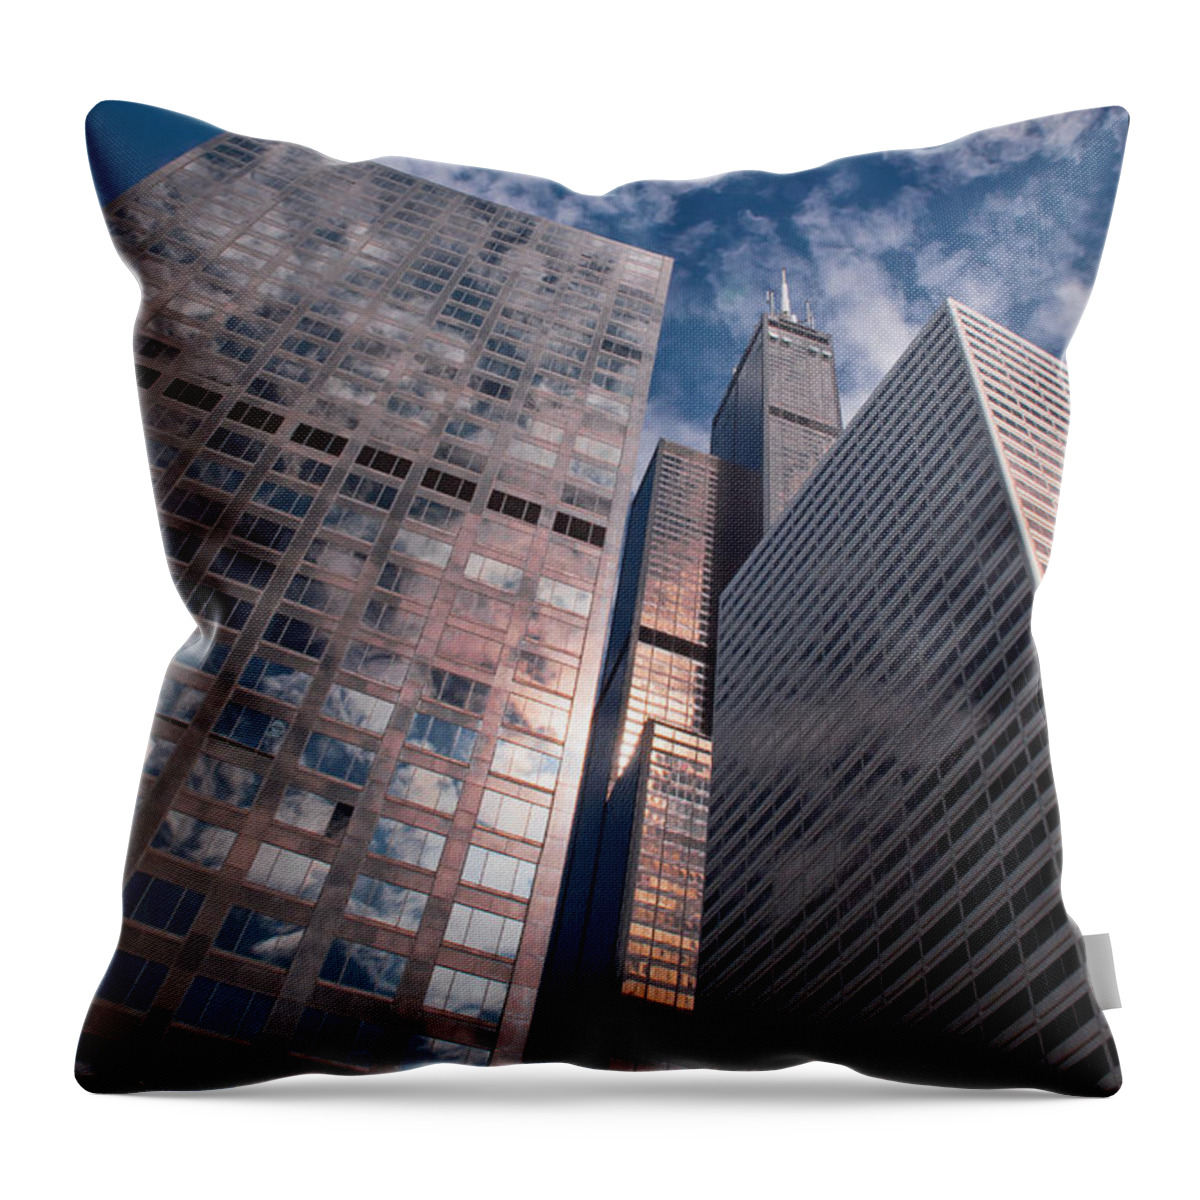 Chicago Downtown Throw Pillow featuring the photograph Chicago Downtown Buildings by Dejan Jovanovic